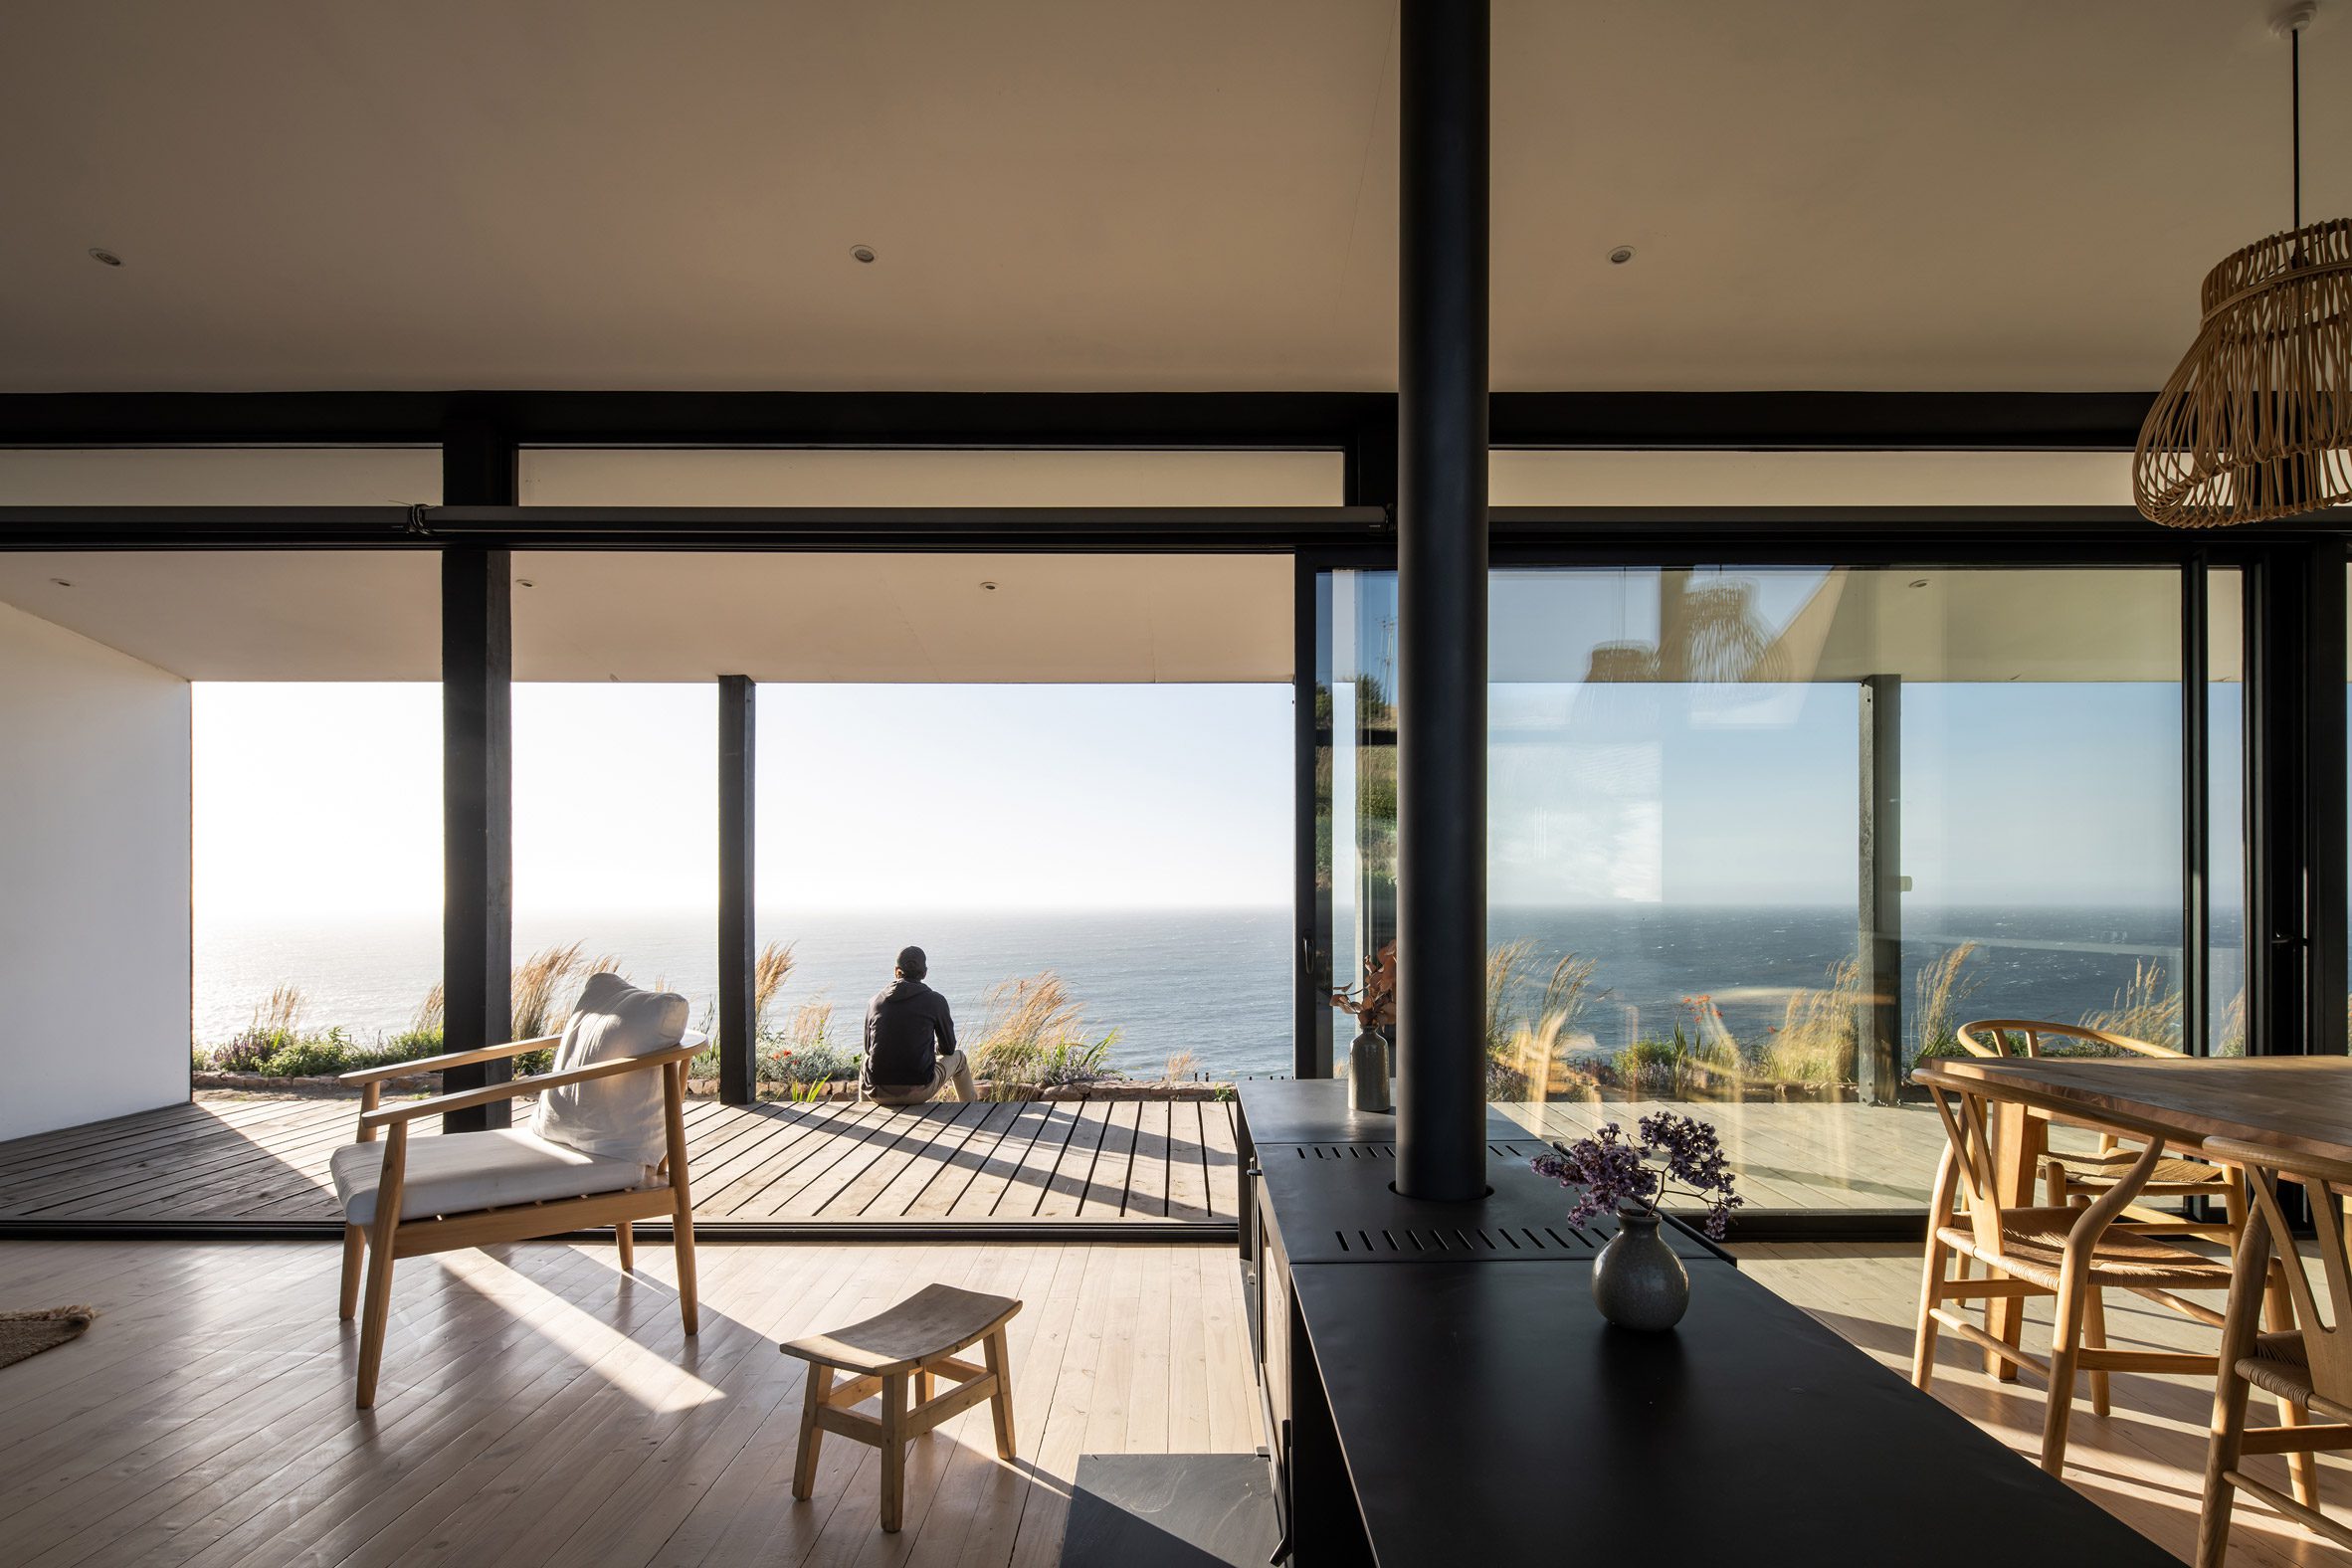 Interior of an open-plan home with large glass sliding doors opening to decking overlooking the sea